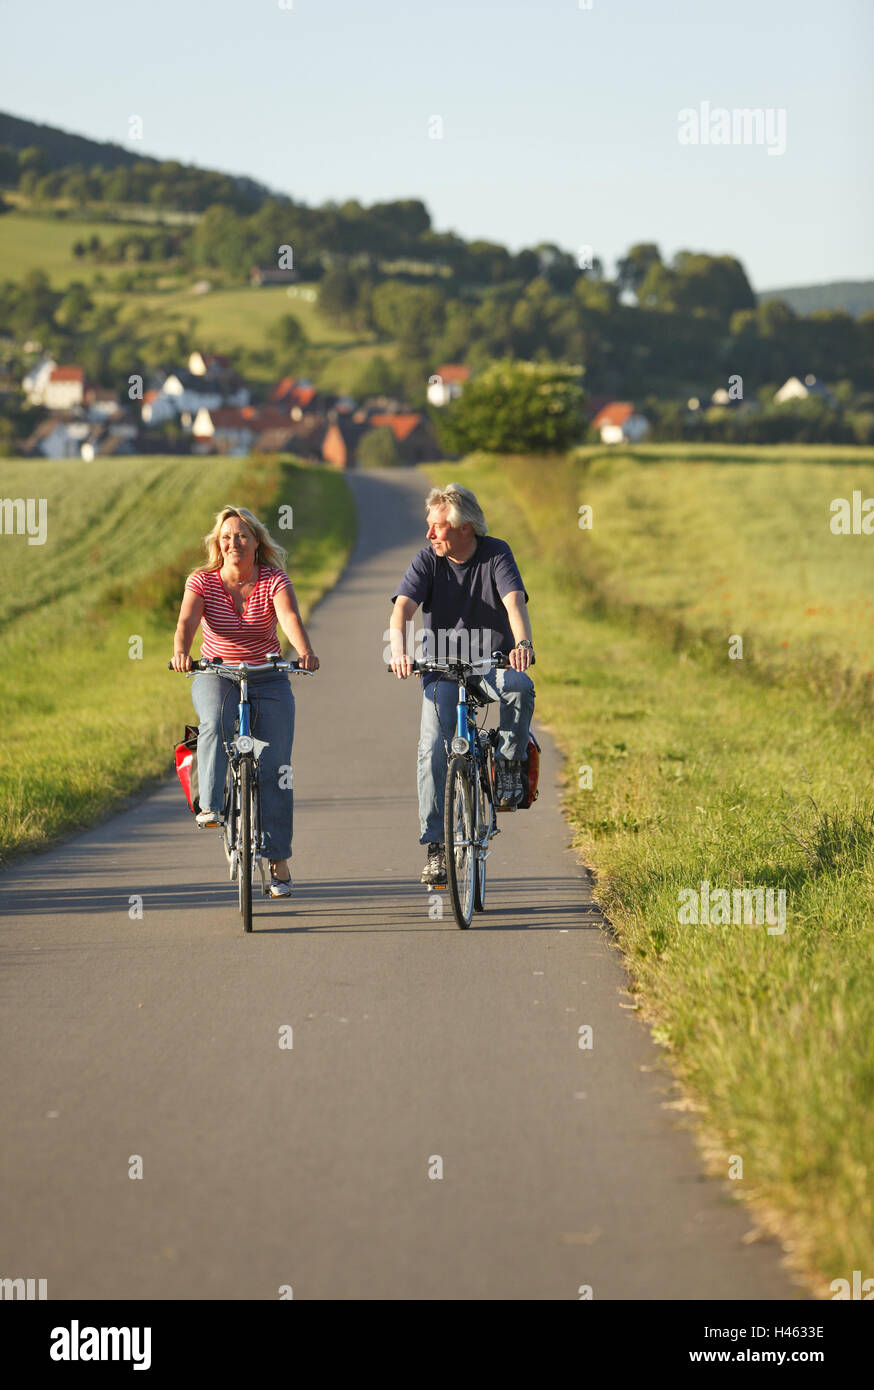 Cycle track, couple, riding a bike, Germany, Lower Saxony, Polle, Weser mountainous country, scenery, sunshine, man, woman, married couple, bicycles, go, happily, happily, tuning, sport, motion, leisure time activity, Idyll, vacation, bicycle tour, excurs Stock Photo